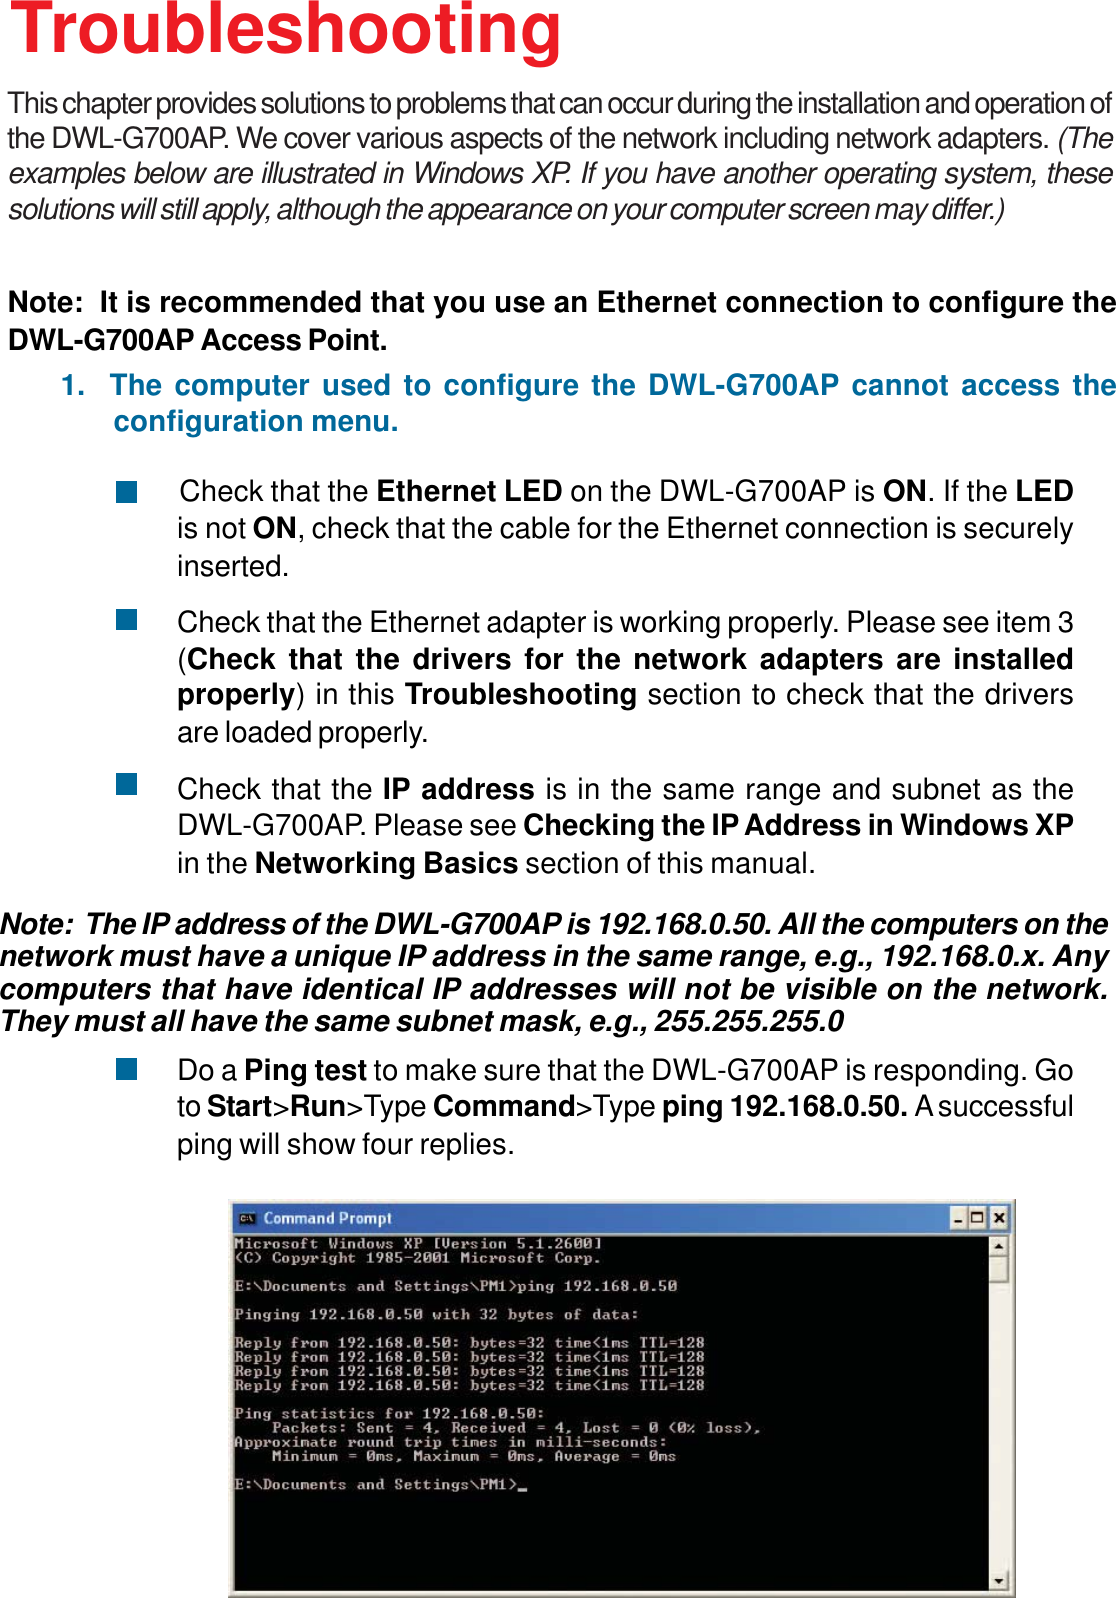 32        Check that the Ethernet LED on the DWL-G700AP is ON. If the LEDis not ON, check that the cable for the Ethernet connection is securelyinserted.Check that the Ethernet adapter is working properly. Please see item 3(Check that the drivers for the network adapters are installedproperly) in this Troubleshooting section to check that the driversare loaded properly.Check that the IP address is in the same range and subnet as theDWL-G700AP. Please see Checking the IP Address in Windows XPin the Networking Basics section of this manual.Do a Ping test to make sure that the DWL-G700AP is responding. Goto Start&gt;Run&gt;Type Command&gt;Type ping 192.168.0.50. A successfulping will show four replies.Note:  It is recommended that you use an Ethernet connection to configure theDWL-G700AP Access Point.1.  The computer used to configure the DWL-G700AP cannot access theconfiguration menu.Note:  The IP address of the DWL-G700AP is 192.168.0.50. All the computers on thenetwork must have a unique IP address in the same range, e.g., 192.168.0.x. Anycomputers that have identical IP addresses will not be visible on the network.They must all have the same subnet mask, e.g., 255.255.255.0TroubleshootingThis chapter provides solutions to problems that can occur during the installation and operation ofthe DWL-G700AP. We cover various aspects of the network including network adapters. (Theexamples below are illustrated in Windows XP. If you have another operating system, thesesolutions will still apply, although the appearance on your computer screen may differ.)